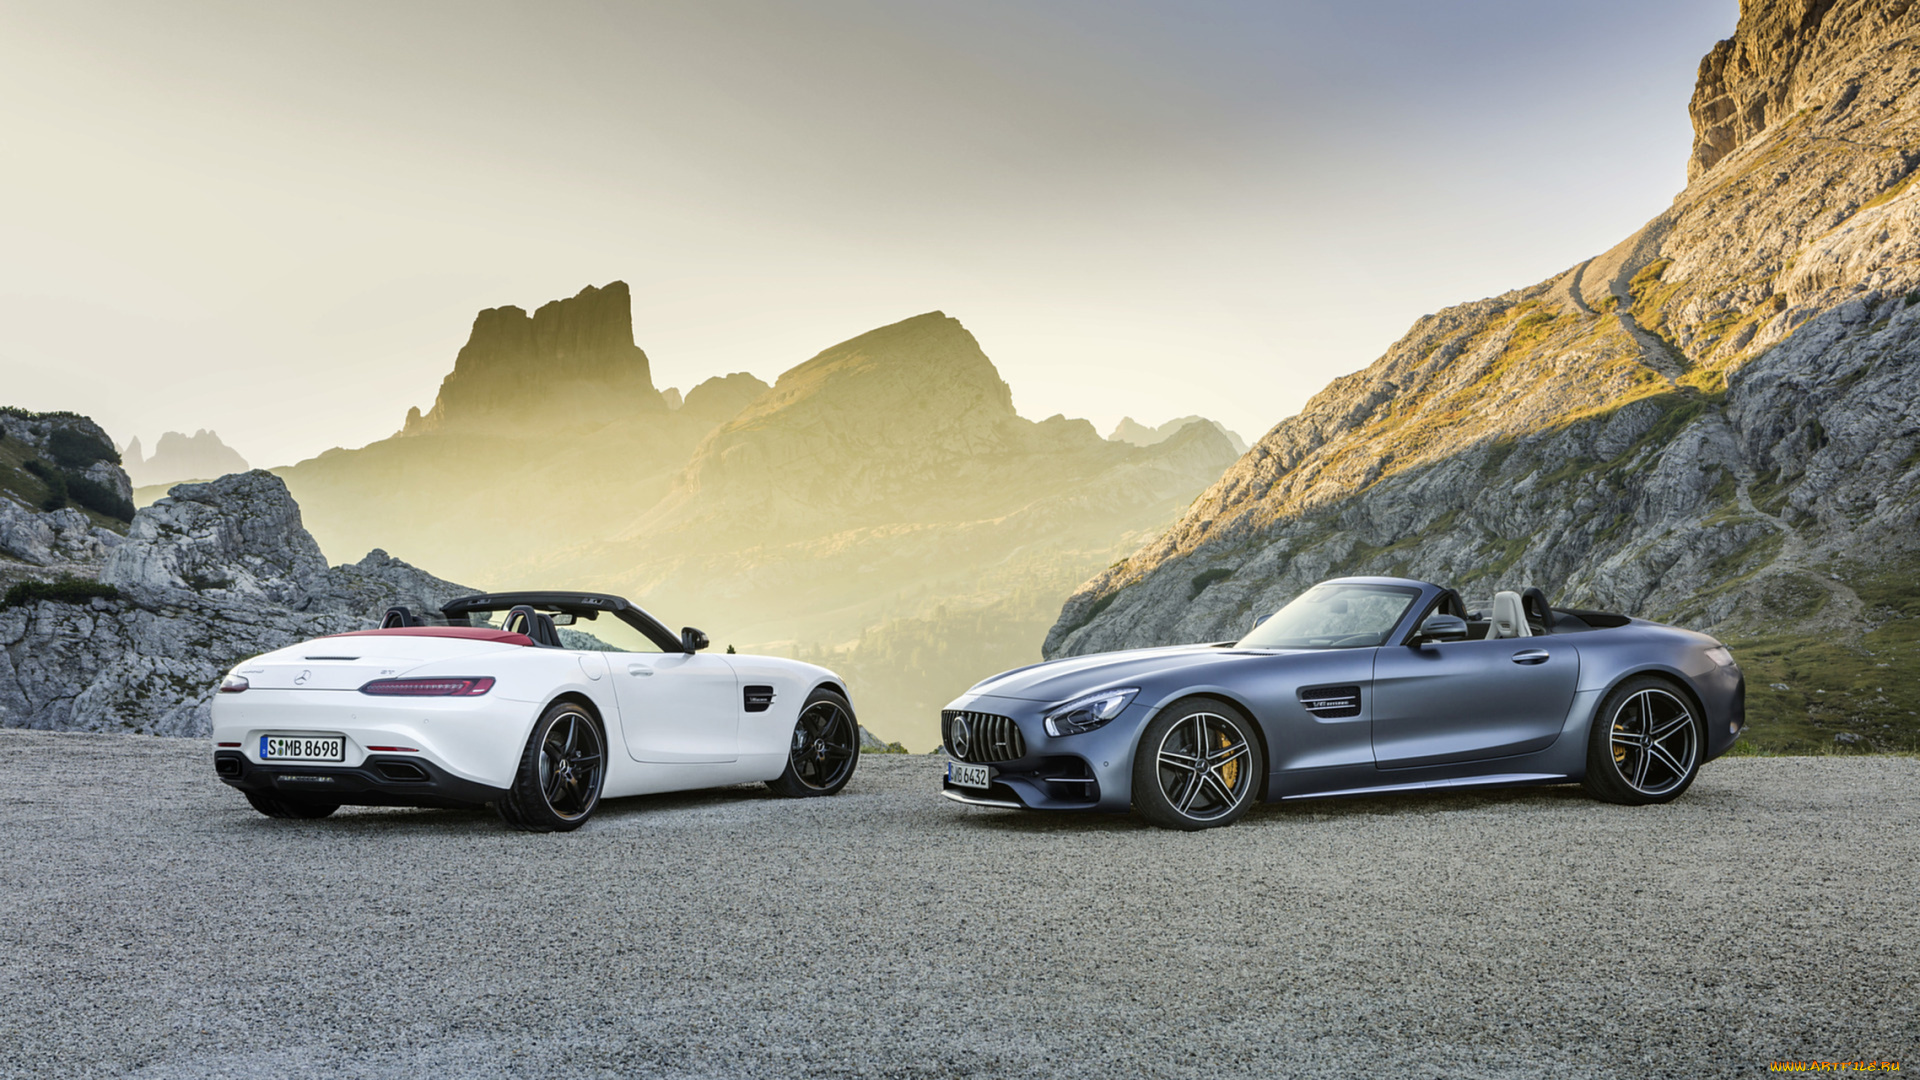 mercedes-benz, amg-gt, and, gt-c, roadsters, 2018, автомобили, mercedes-benz, amg-gt, gt-c, -roadsters, 2018